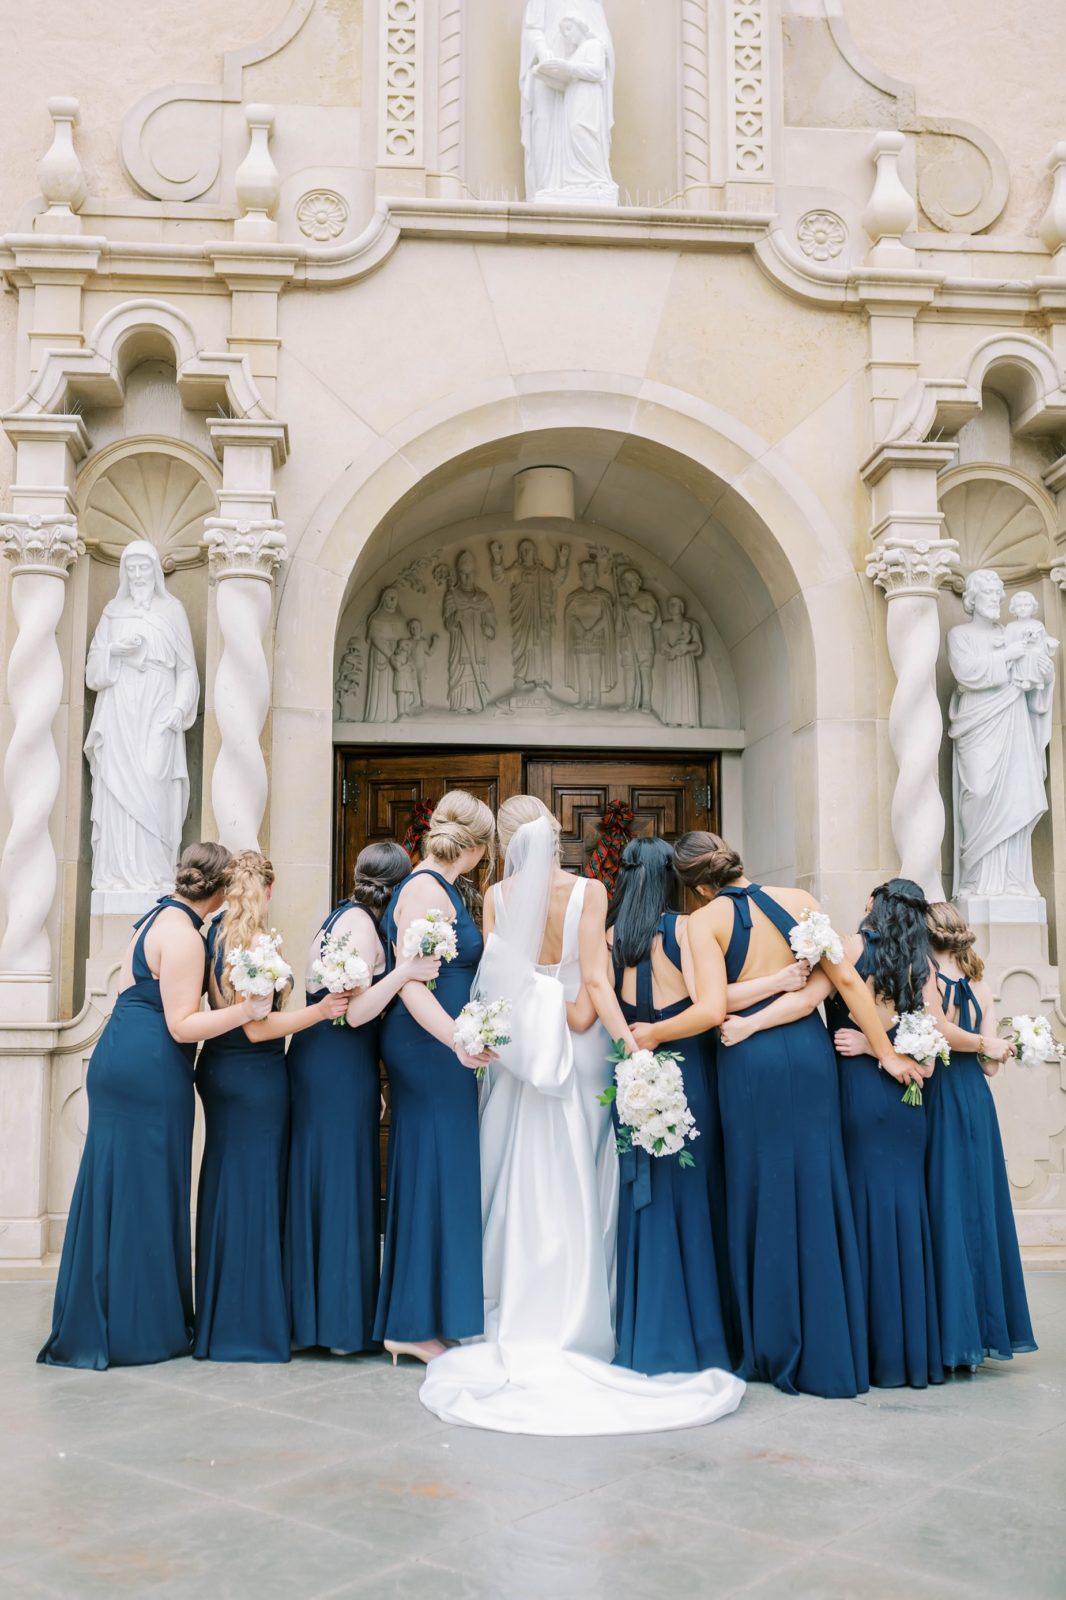 A bridal party in front of Houston's St. Anne Catholic church by Christina Elliott Photography. church wedding catholic wedding #christinaelliottphotography #Houstonweddings #catholicchurchweddings #navyblue #sayIdo #Houstonweddingphotographers